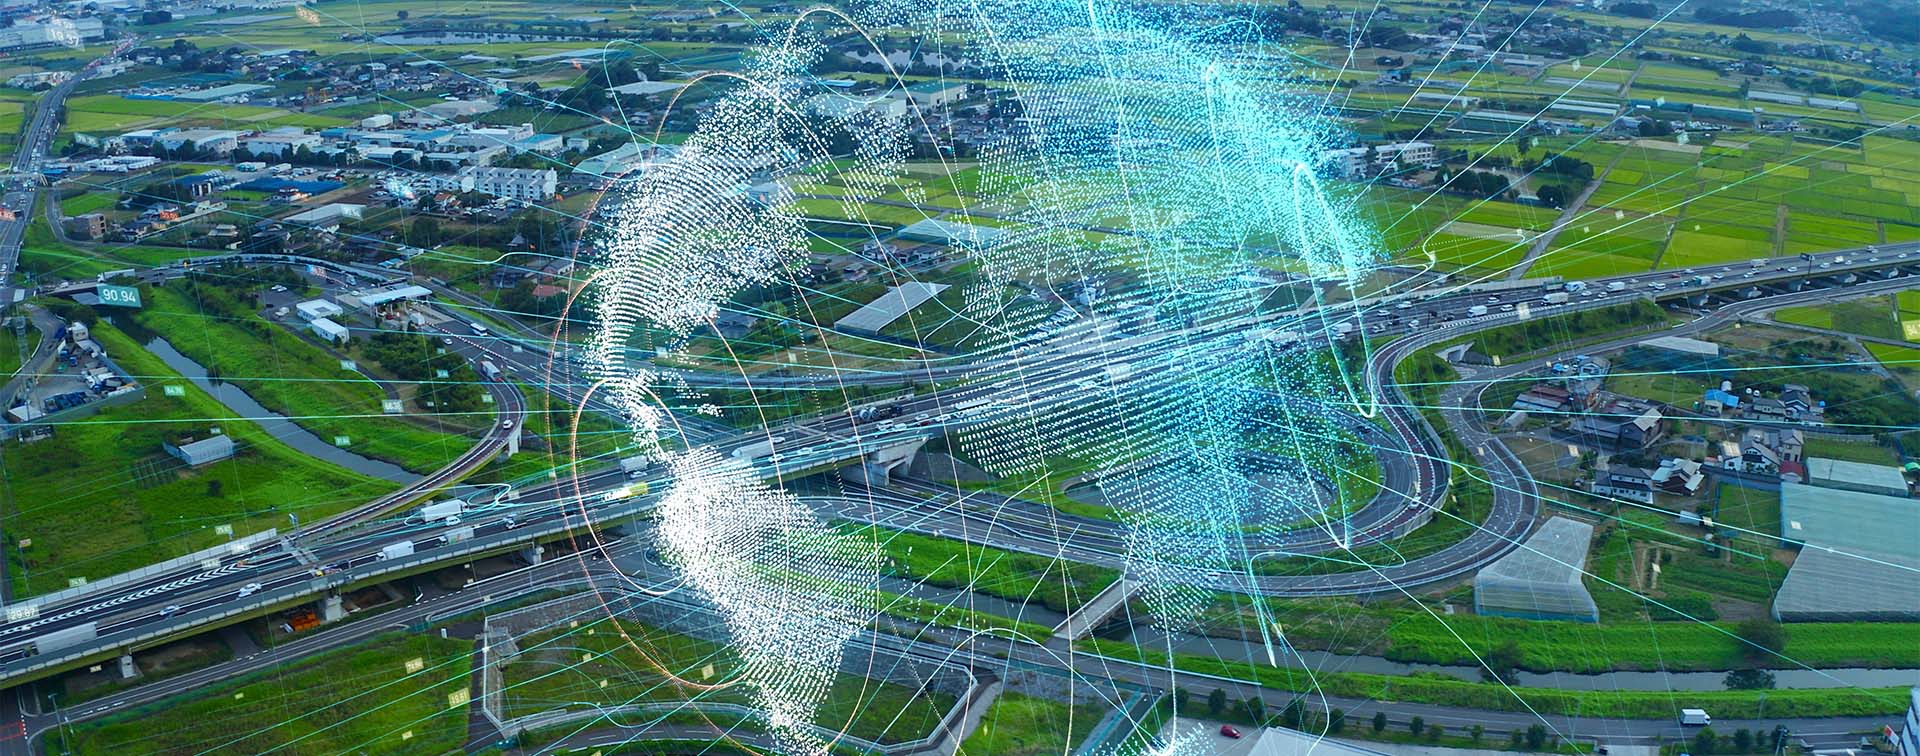 Glowing digital globe over a connected system of highways.